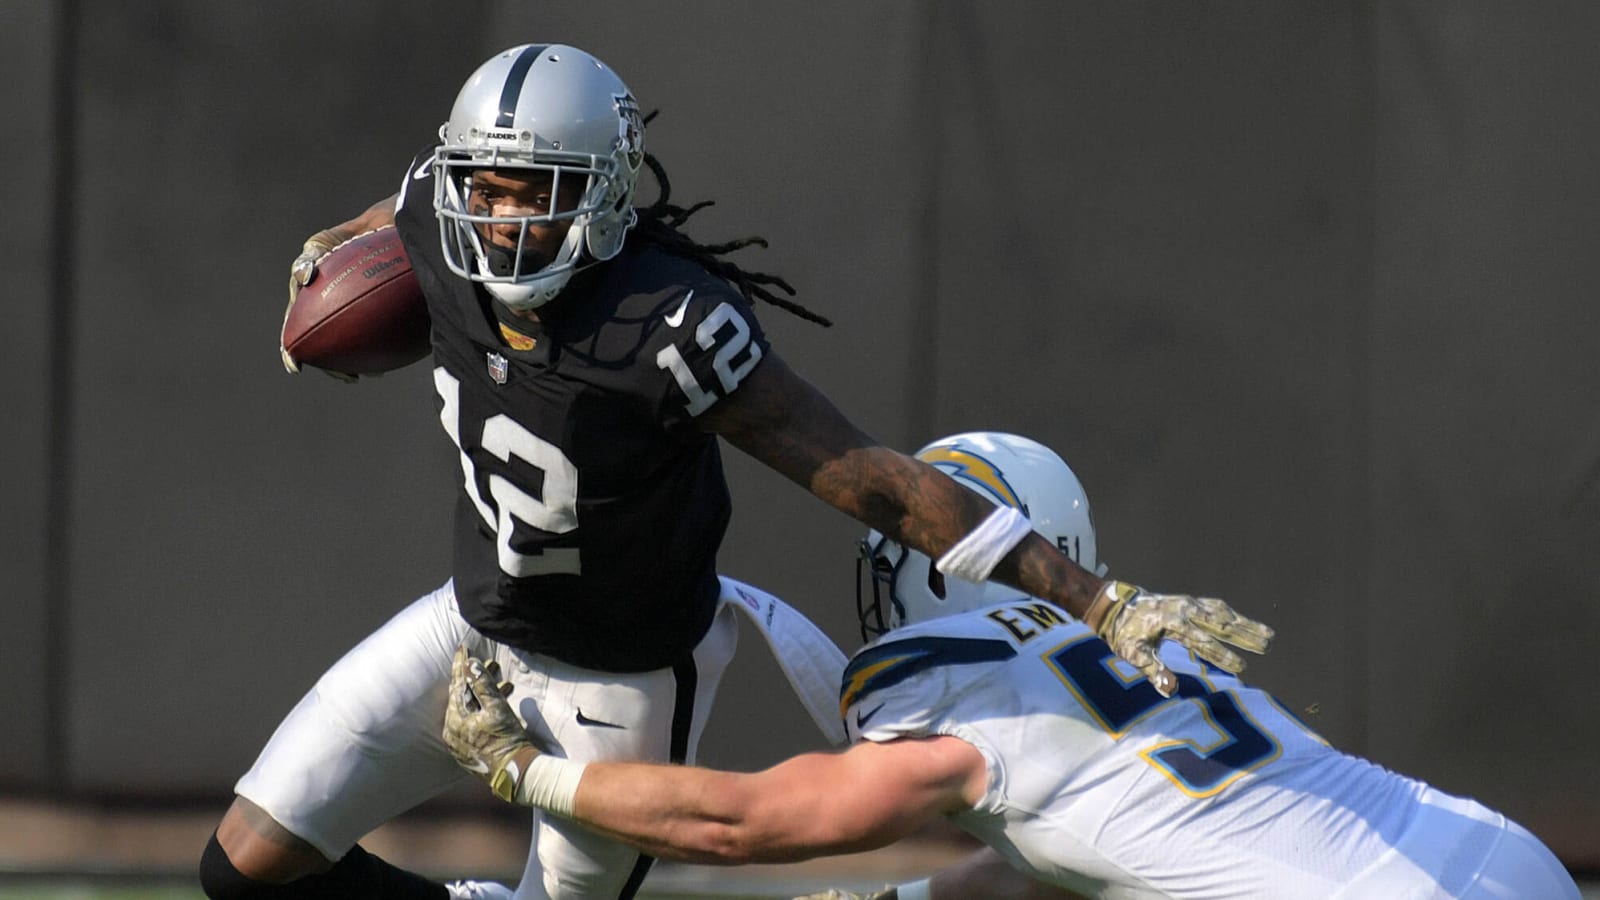 'Showing More and More!' Cowboys Plans for Martavis Bryant?